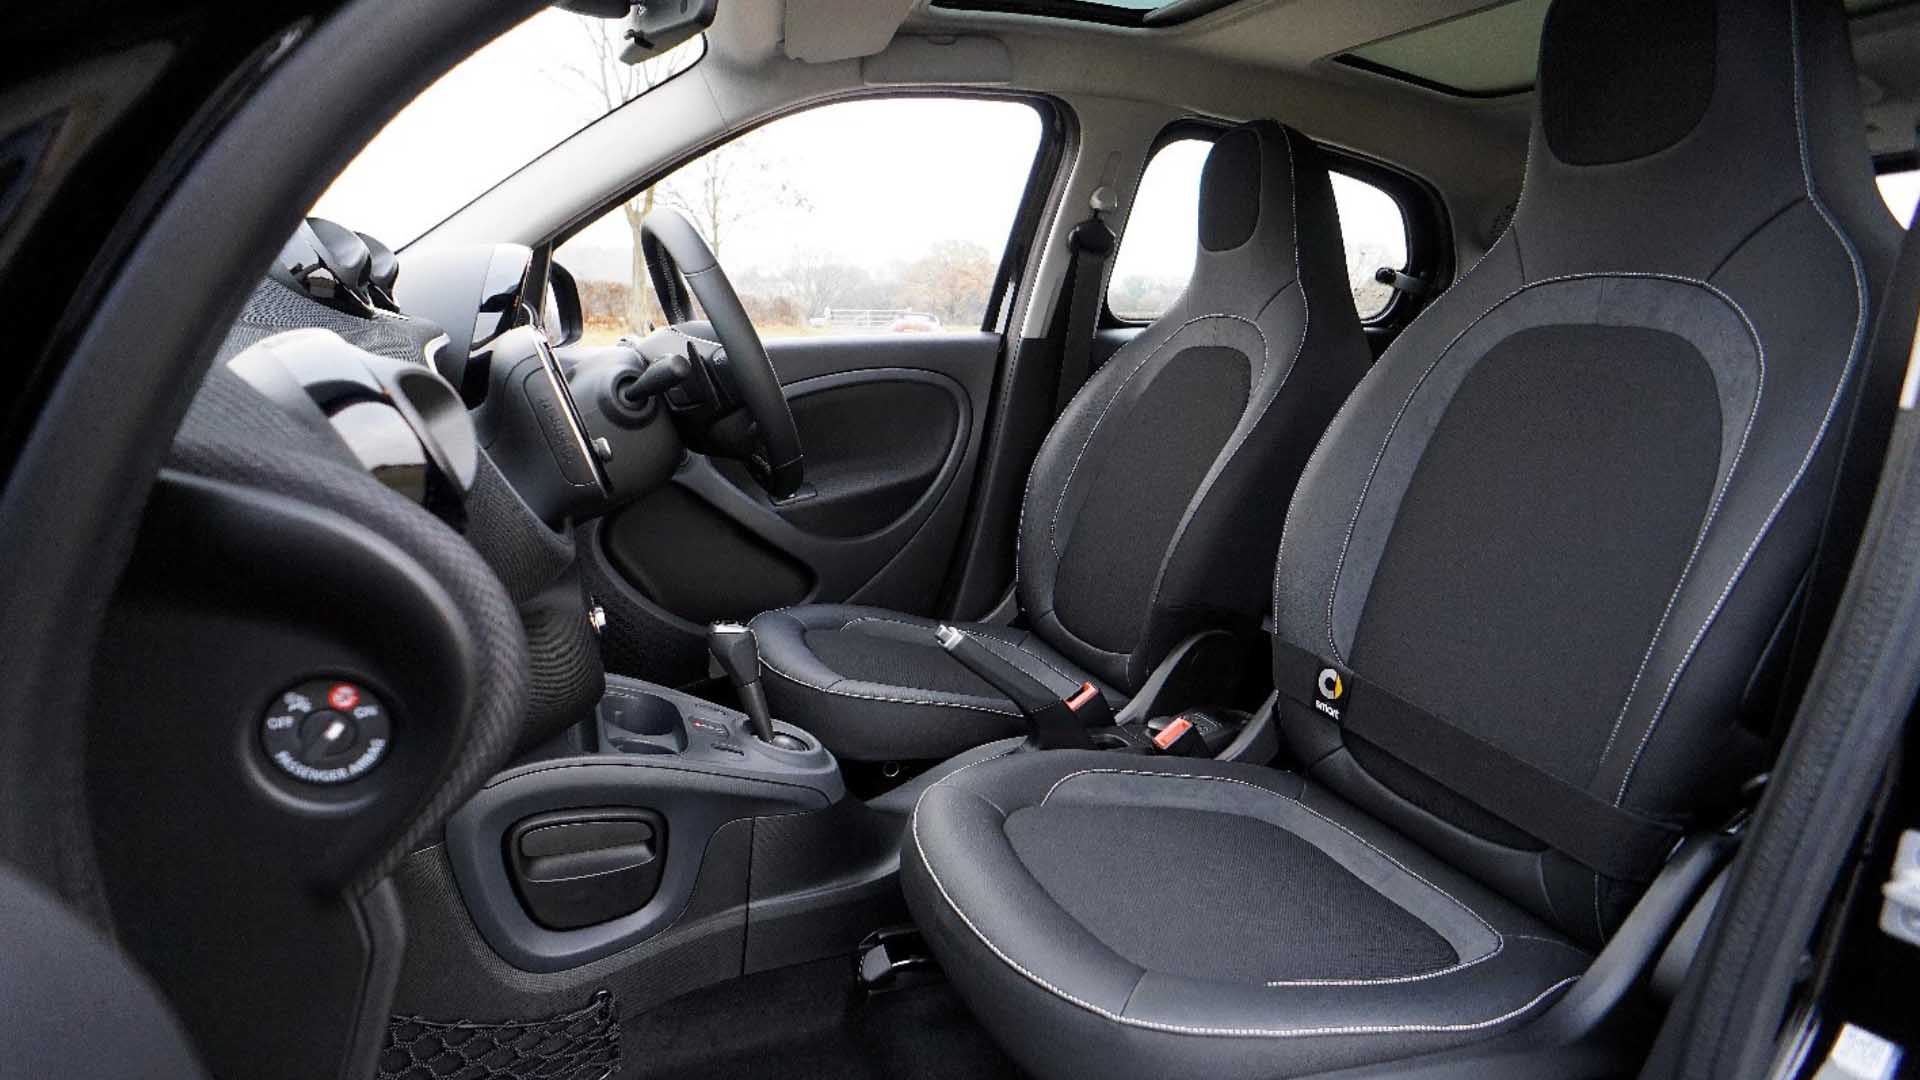 Sanitize and Super Clean the Interior of your Car